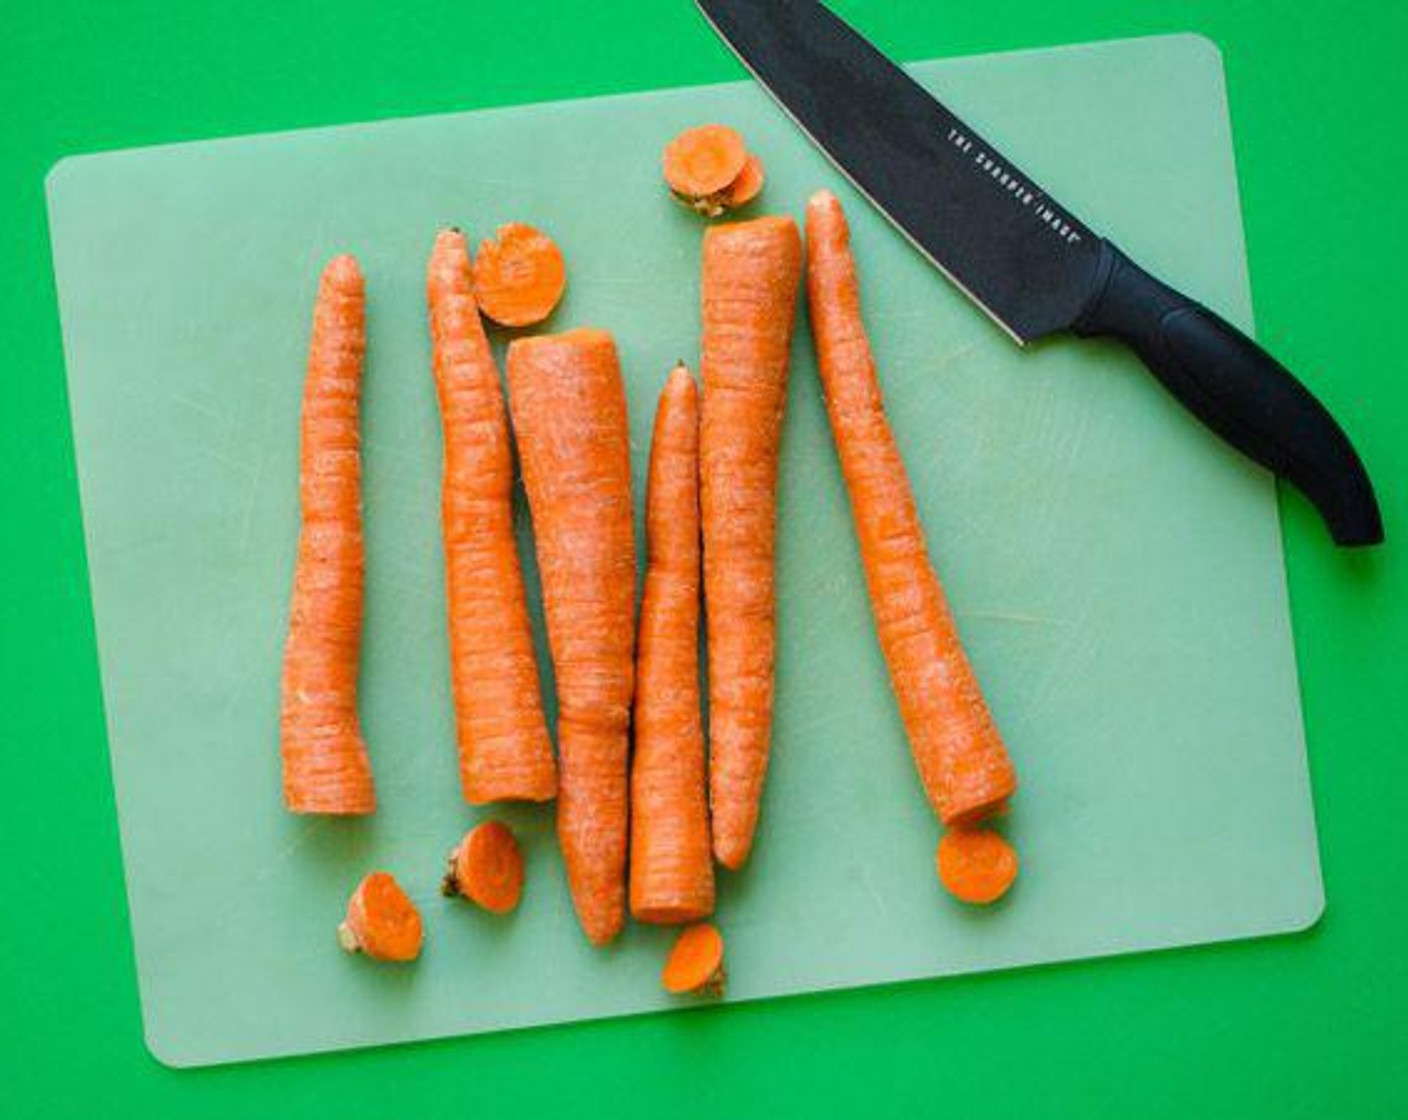 step 2 Bring a large pot of water to a boil. Add Carrots (6) to soften them slightly, about 30 seconds. Remove from water and let sit until cool enough to handle.